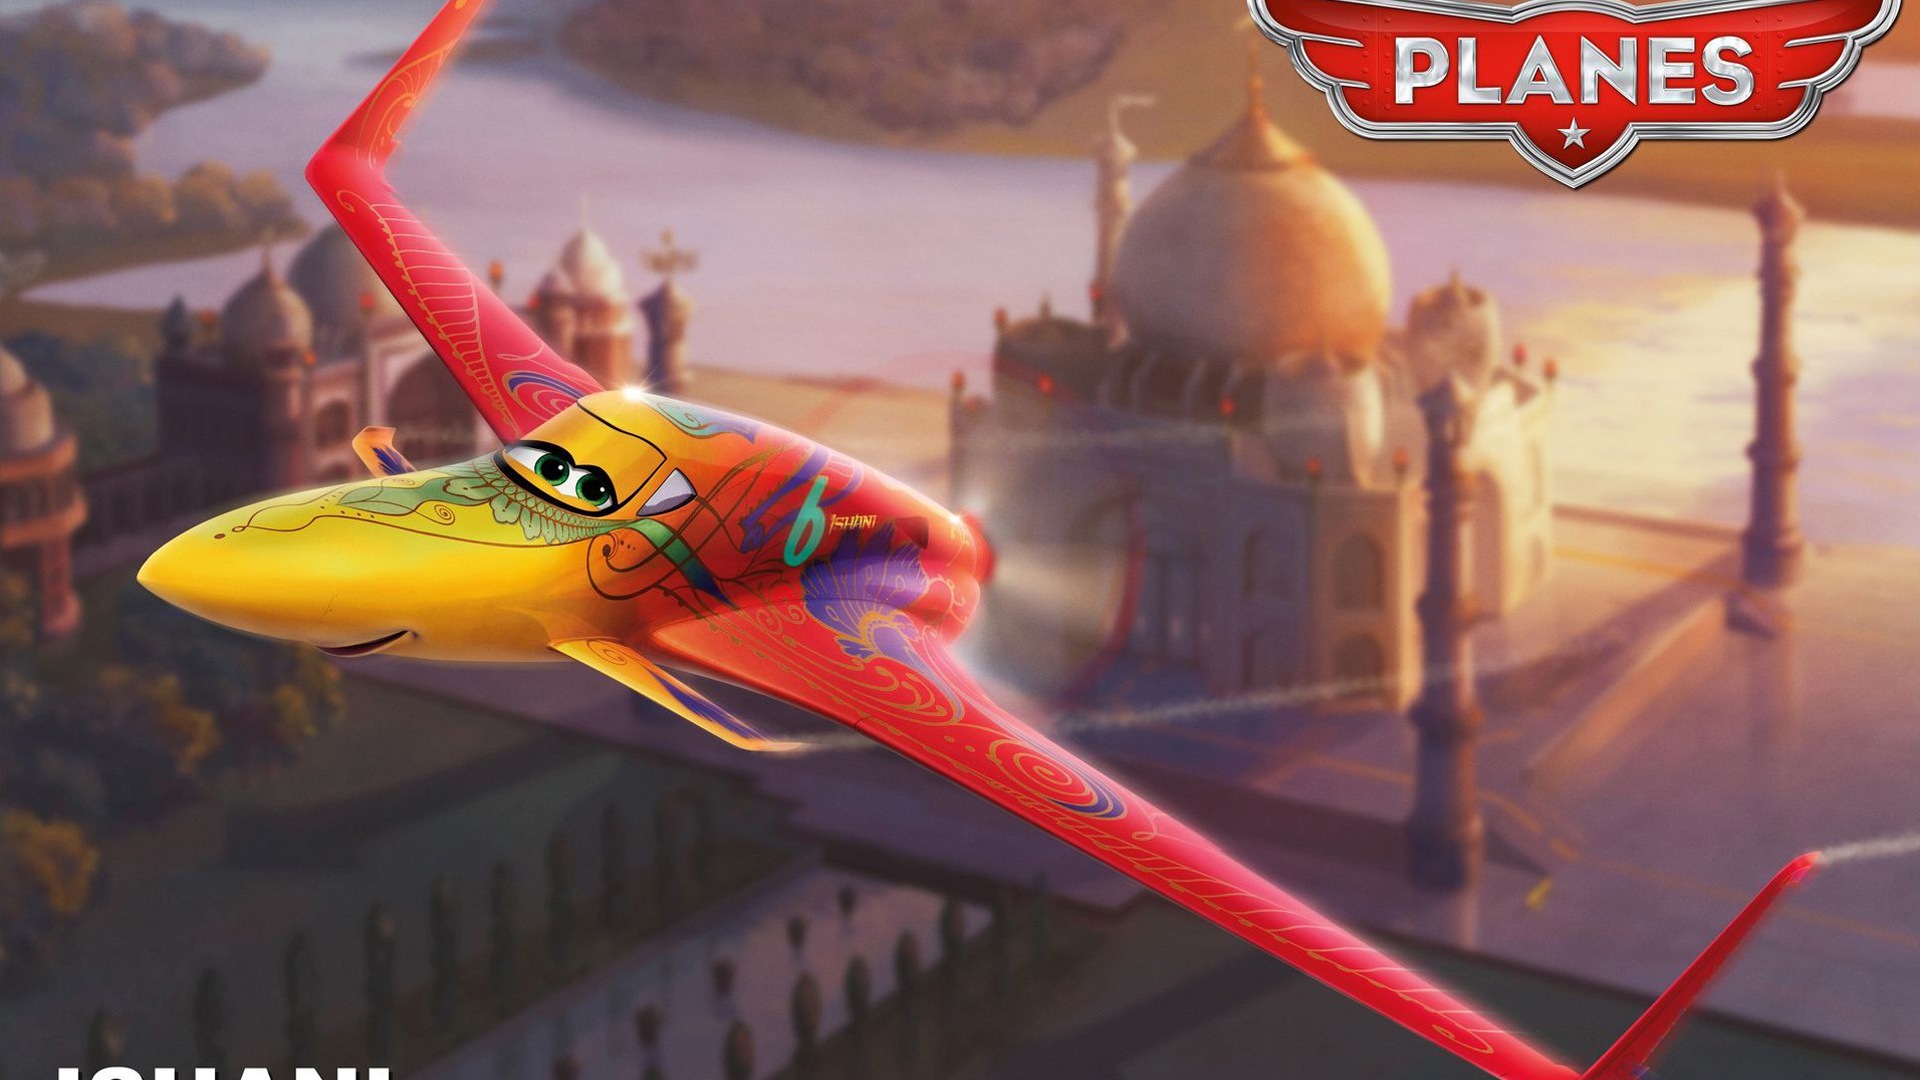 Planes 2013 HD wallpapers #1 - 1920x1080